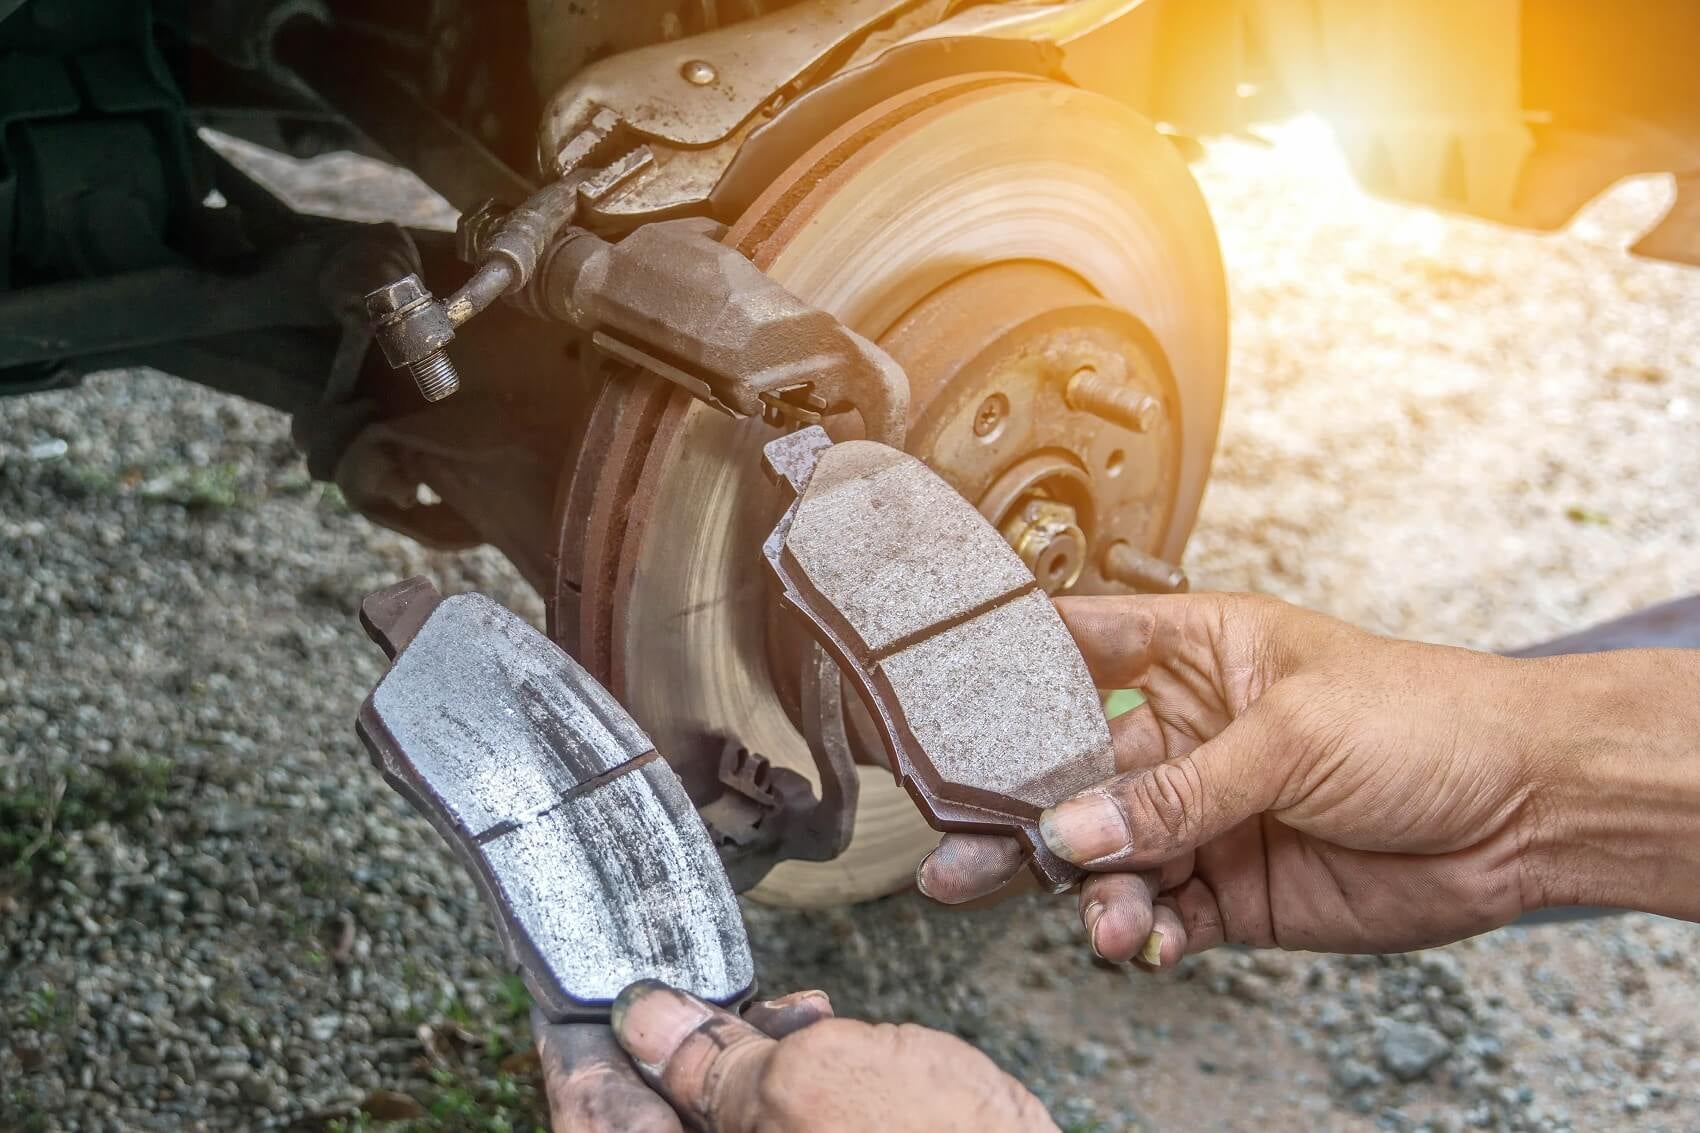 When to Replace Brake Pads